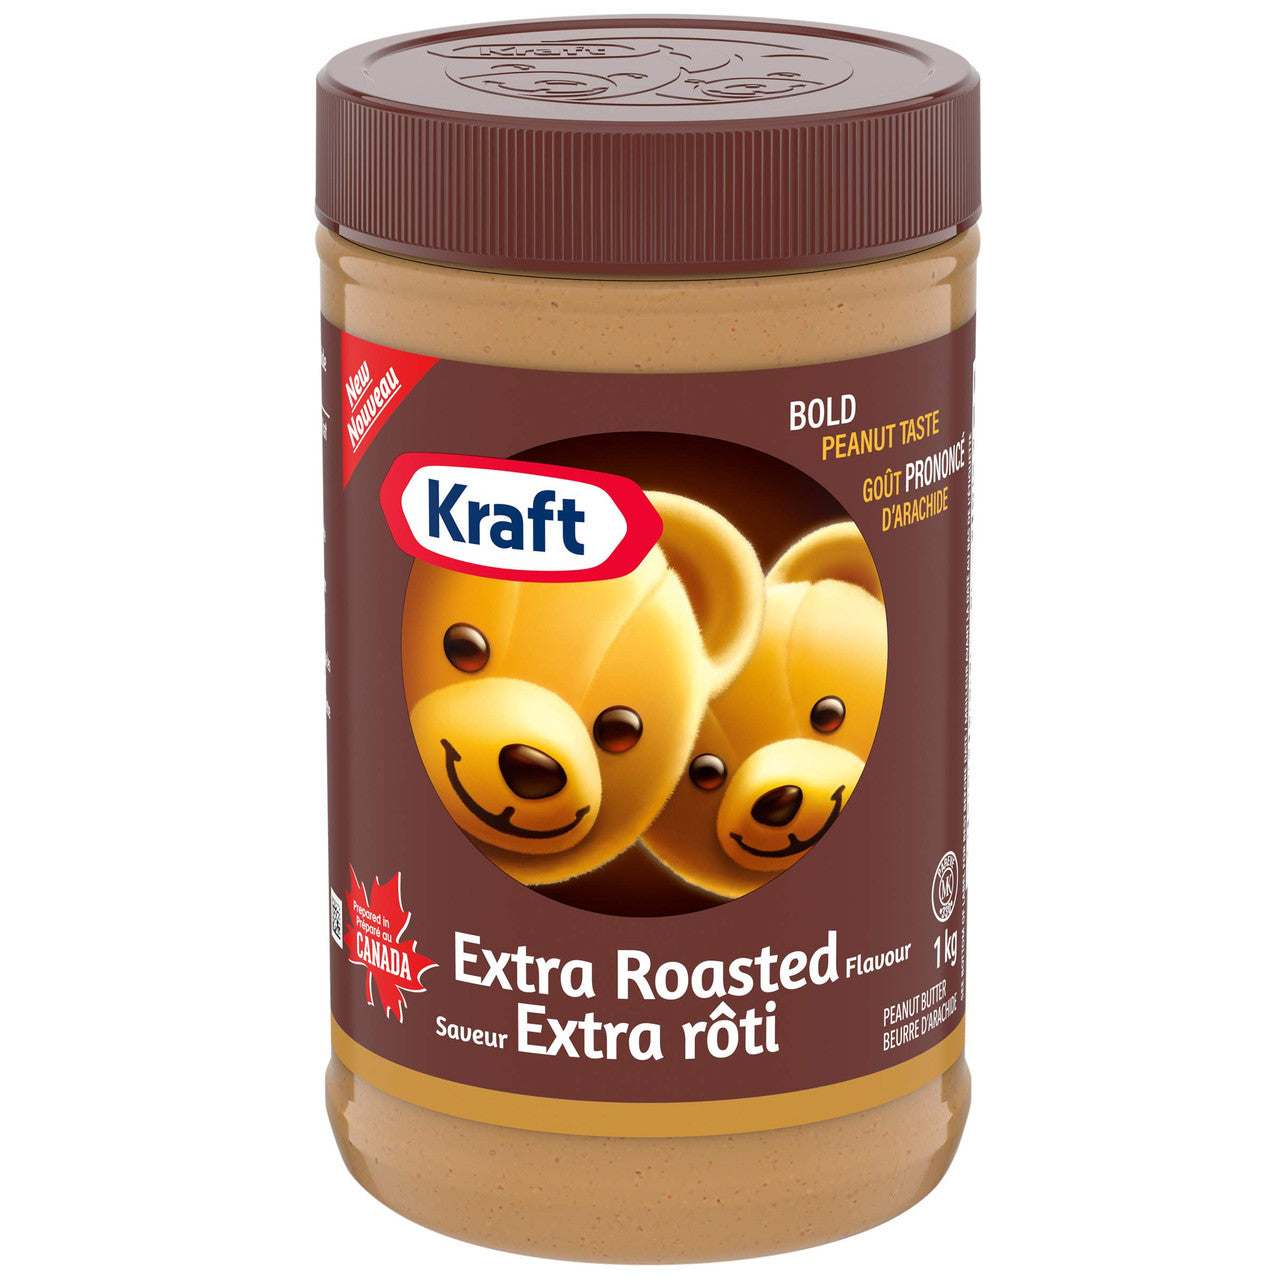 Kraft Extra Roasted Peanut Butter, 1kg/2.2 lbs {Imported from Canada}